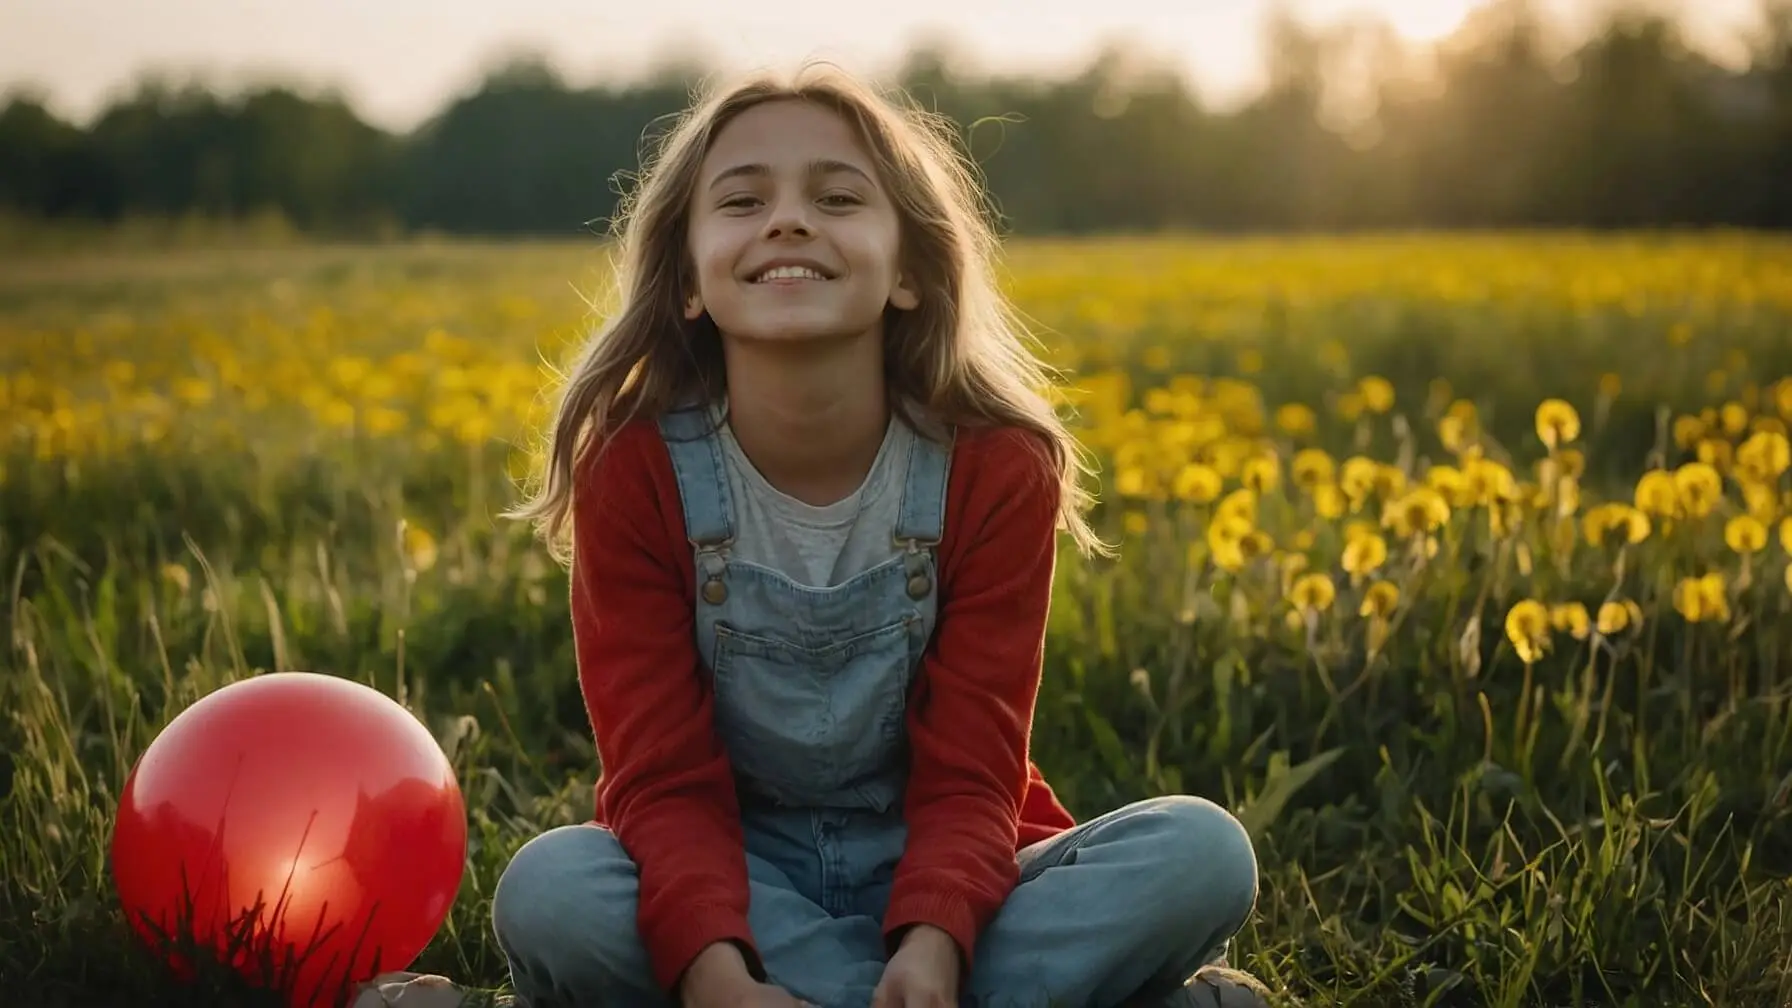 Smiling girl sits on a dandelion field. Red balloon lays beside her.